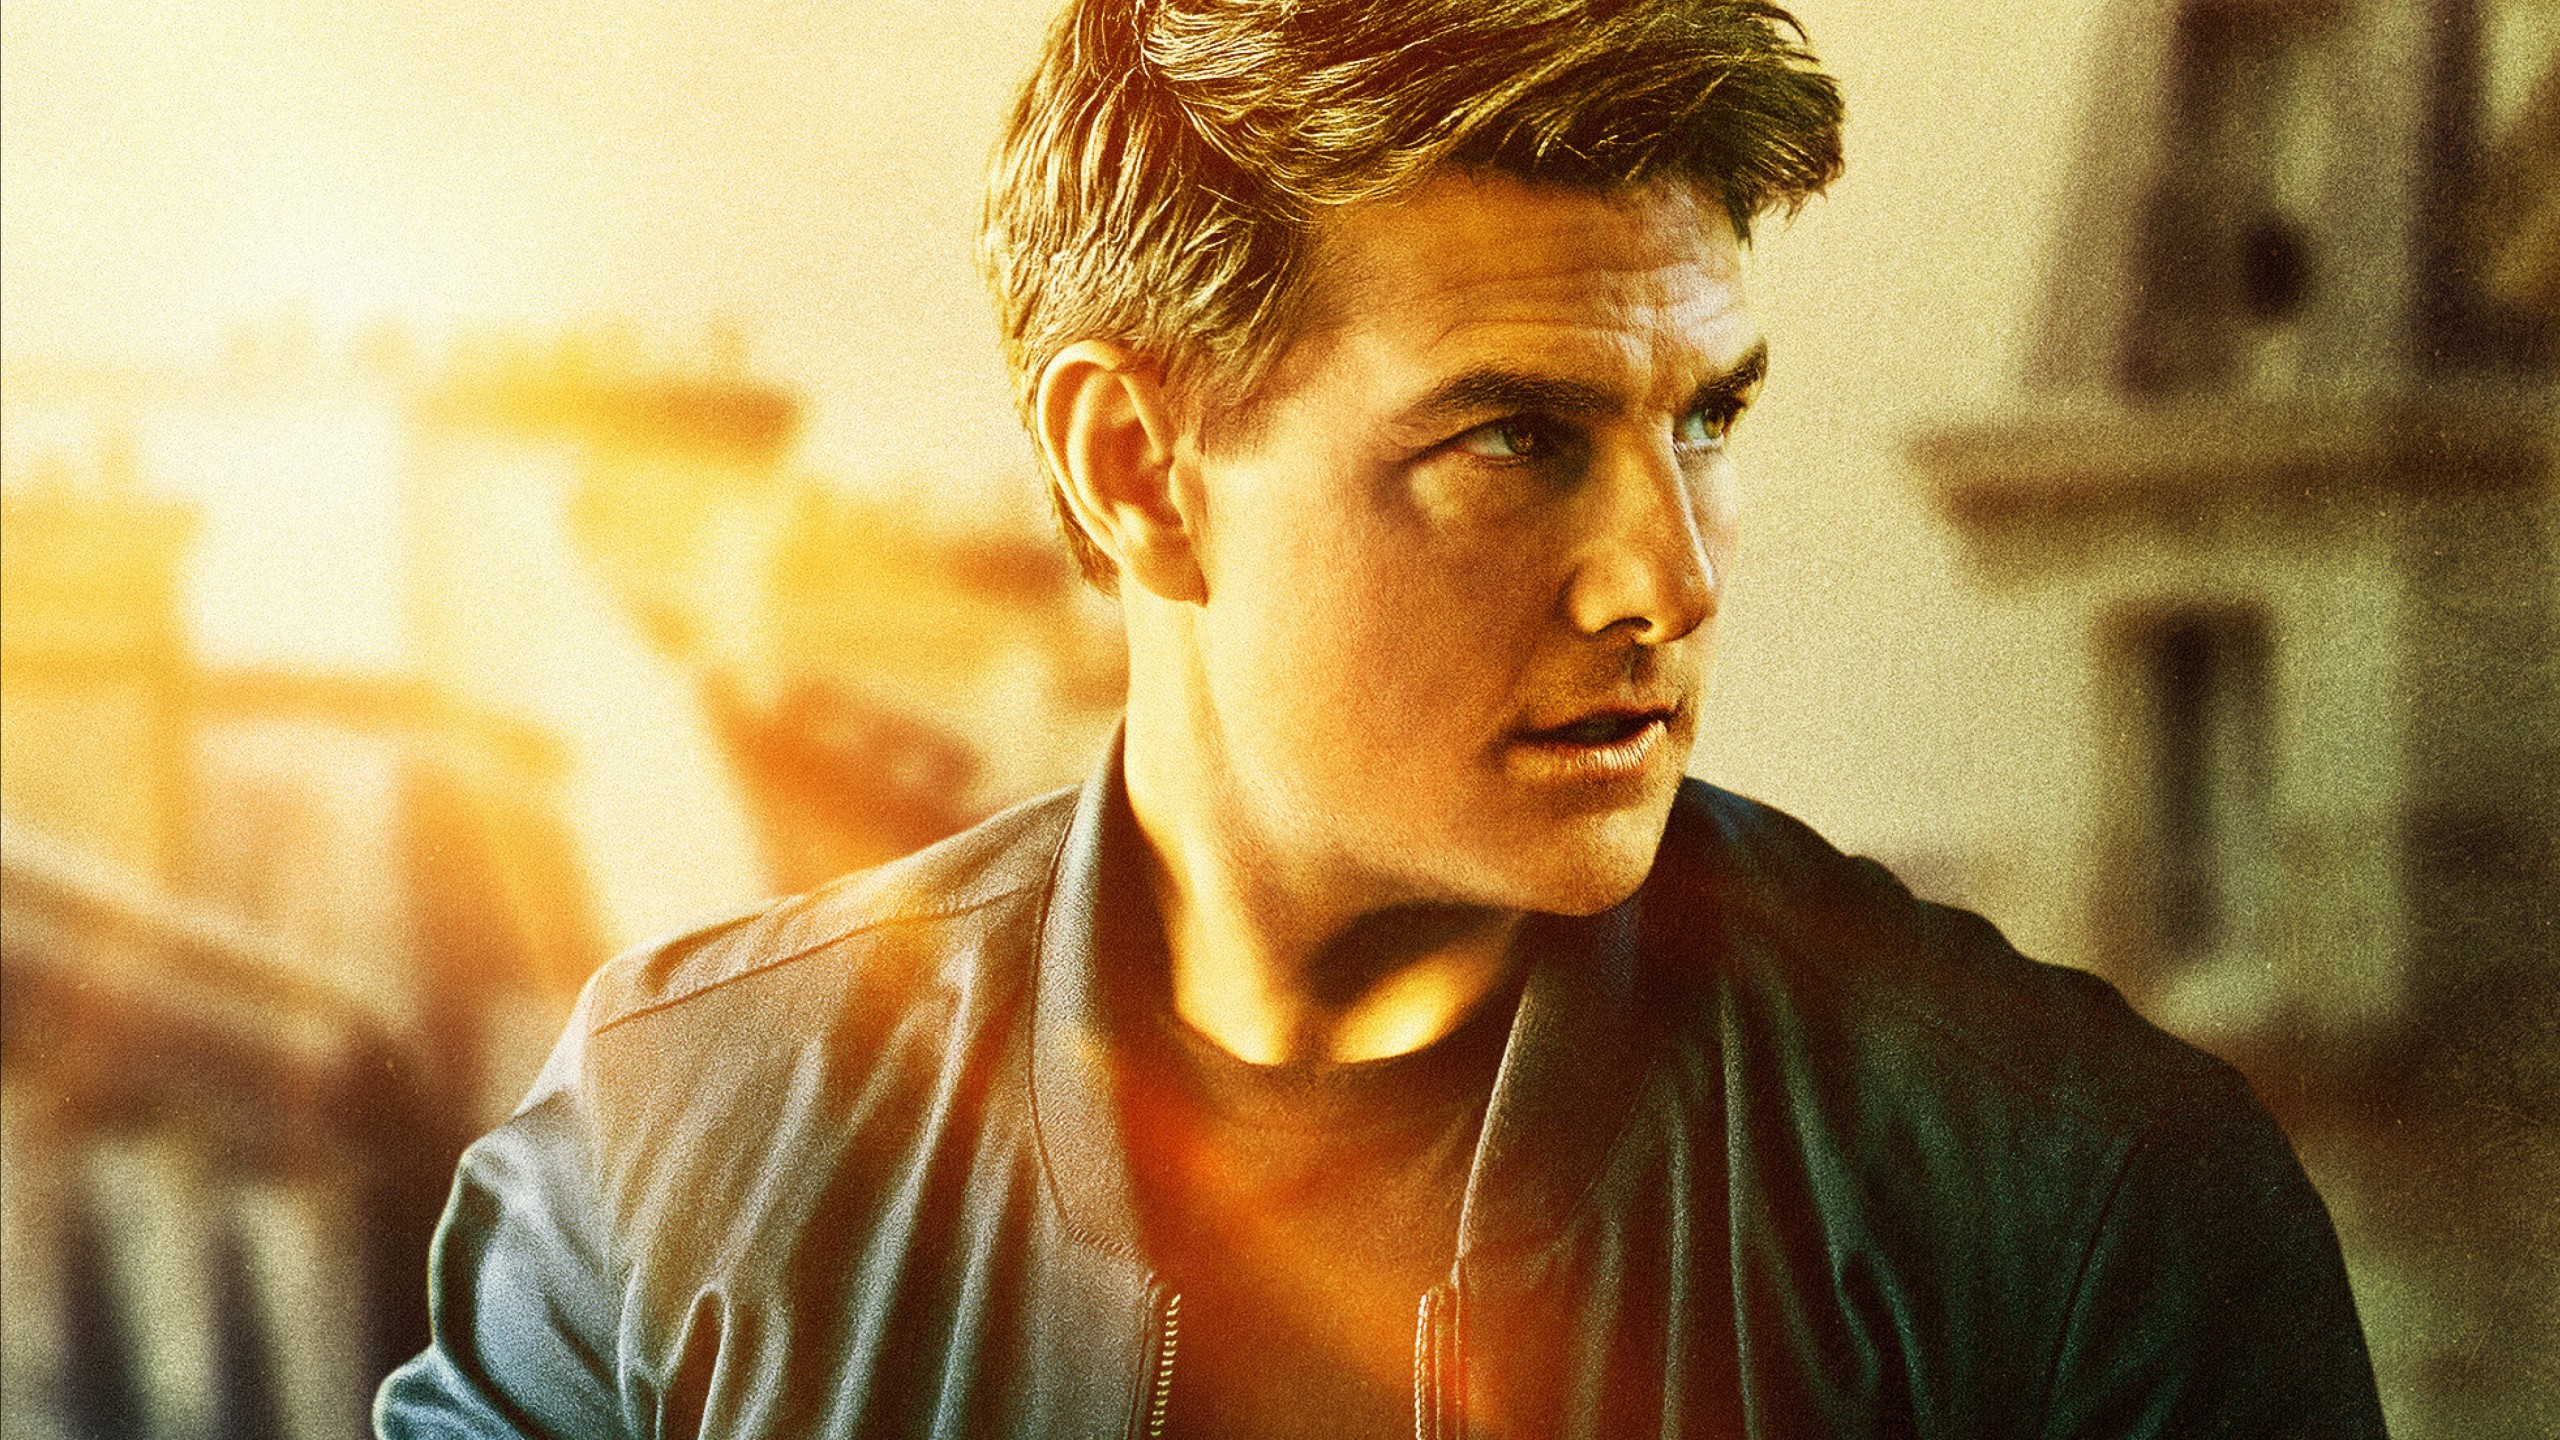 Wallpaper Mission Impossible Fallout Tom Cruise 4k Movies